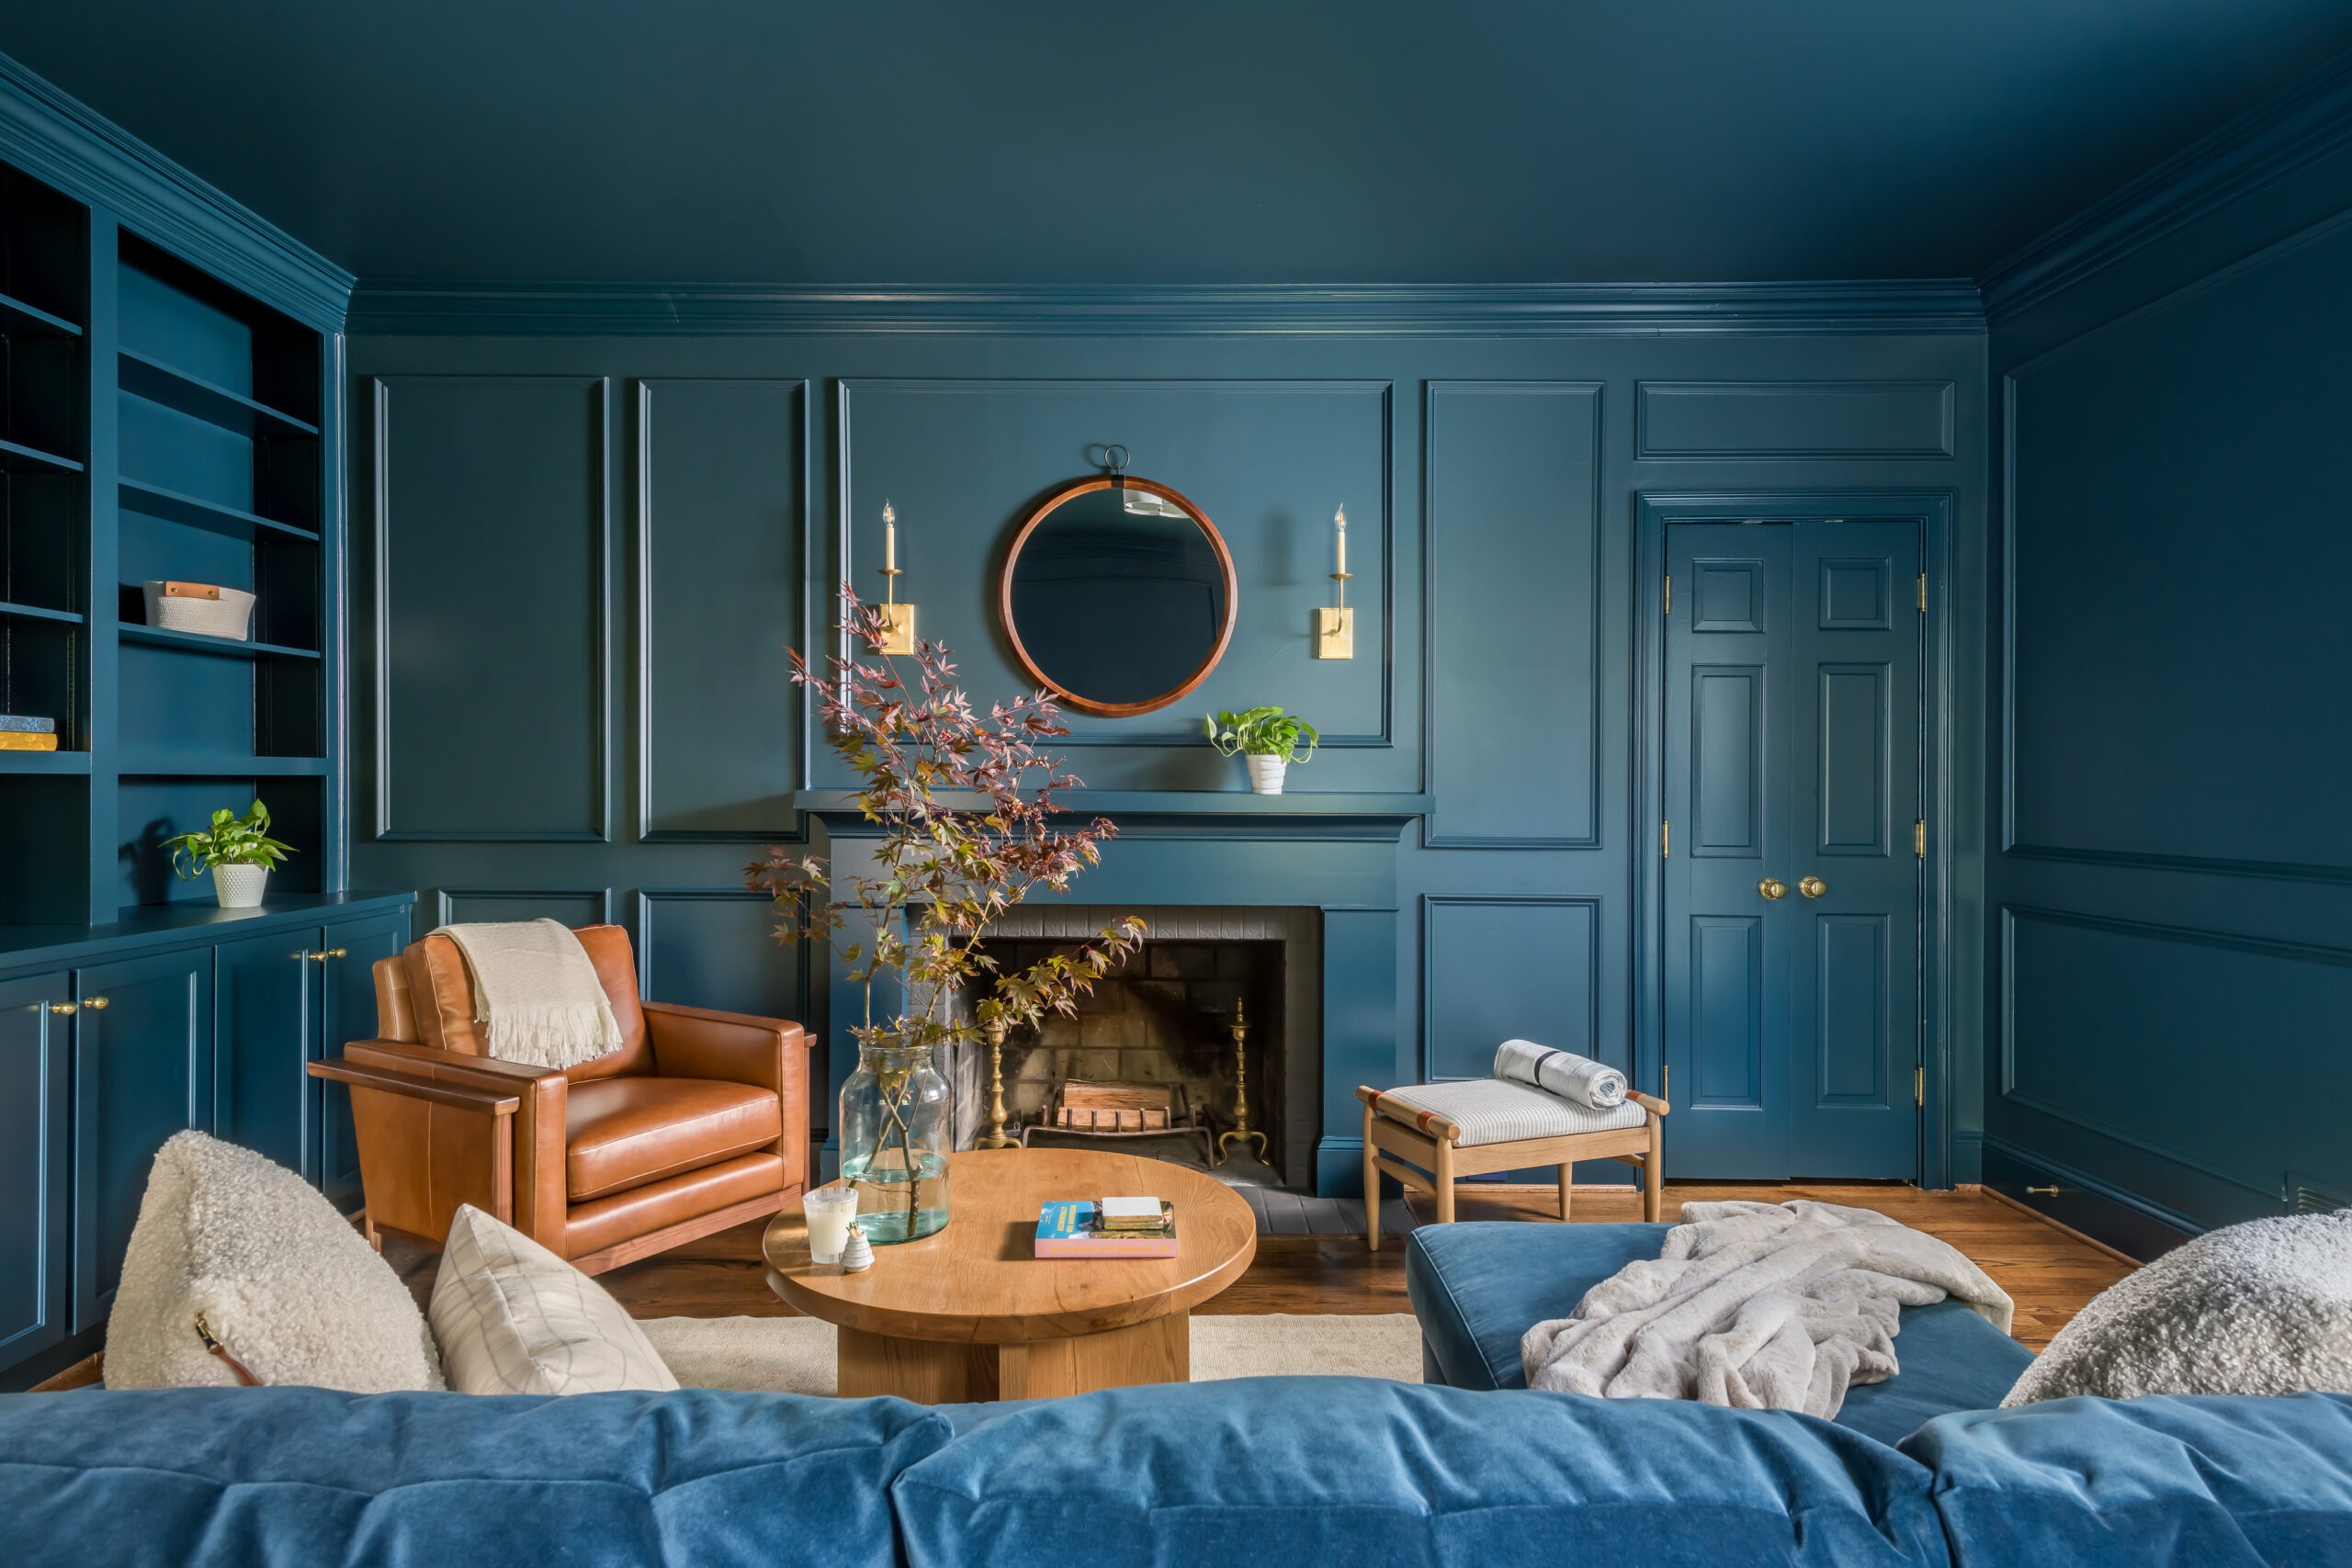 Aesthetic family library with blue walls and couch